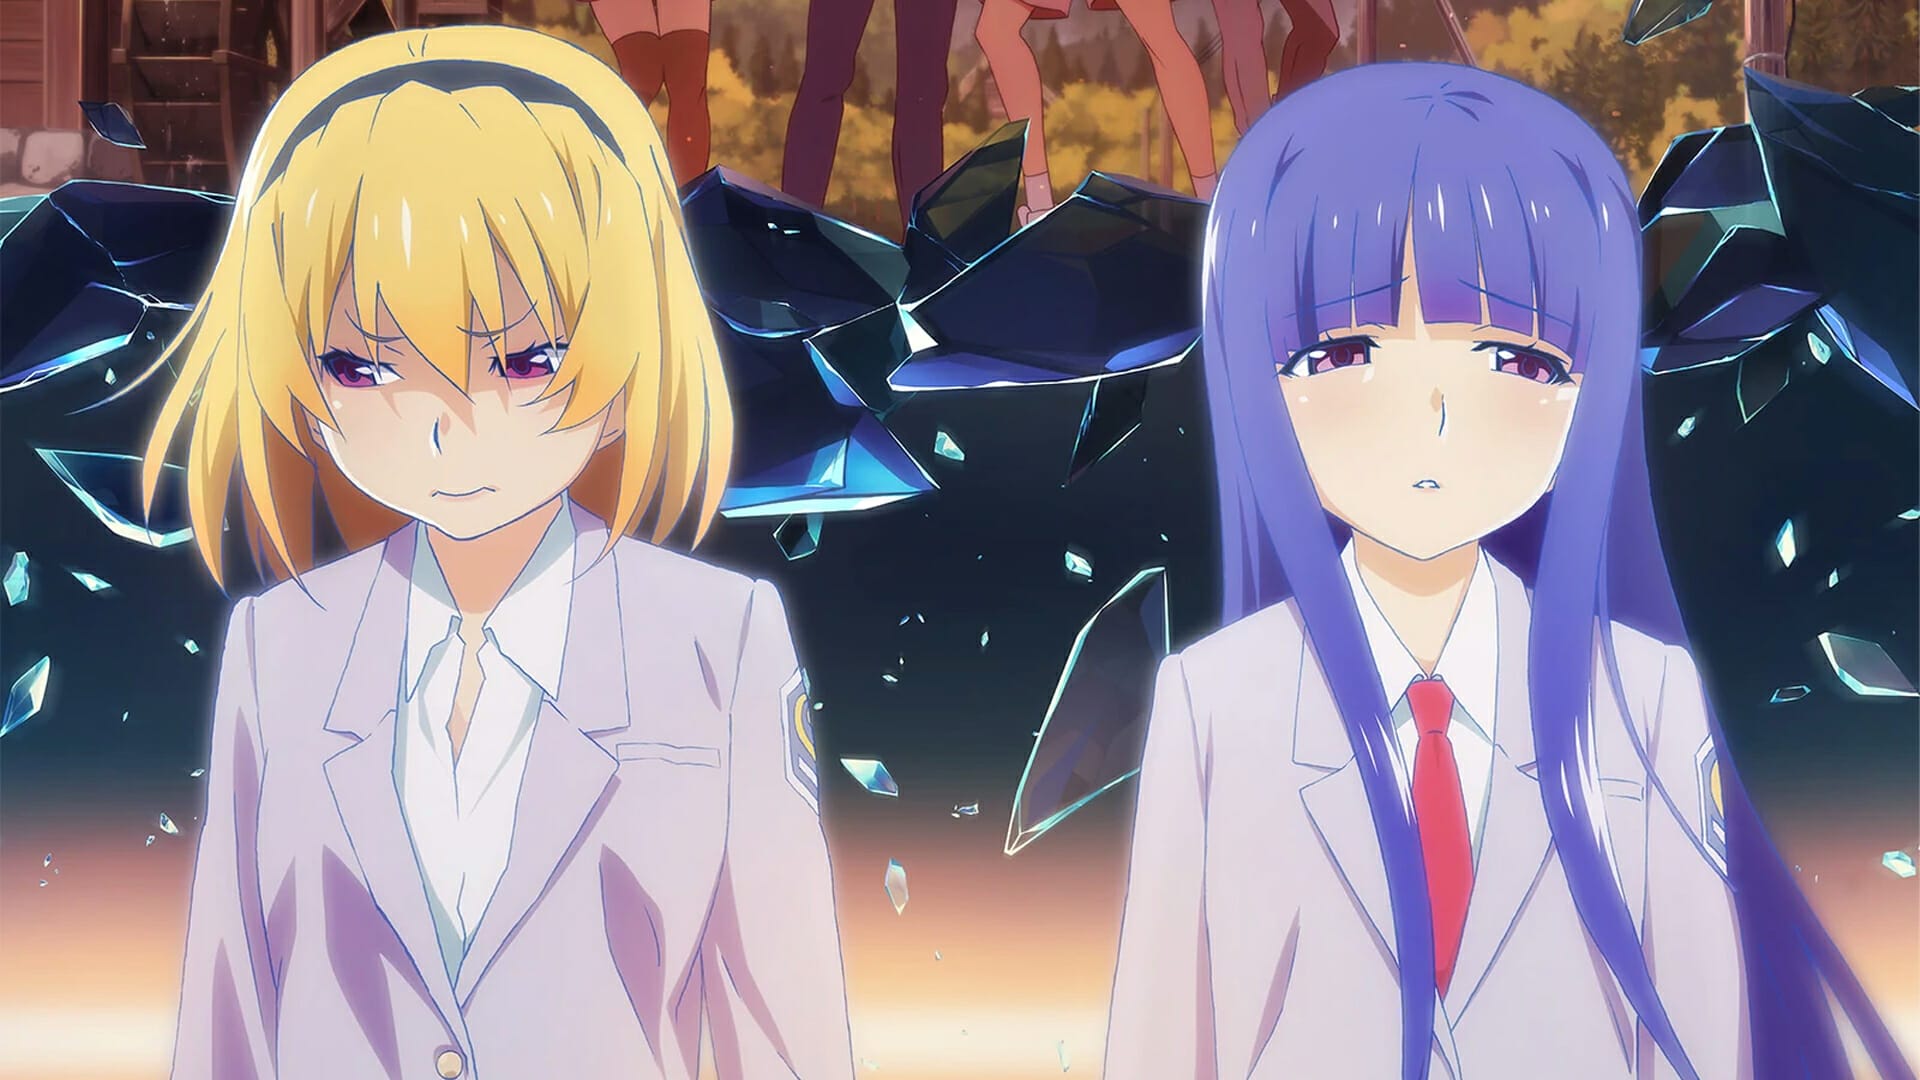 Promo image for Higuarshi Sotsu featuring a mid-shot of two high school girls, one with short blonde hair and one with long pale purple hair